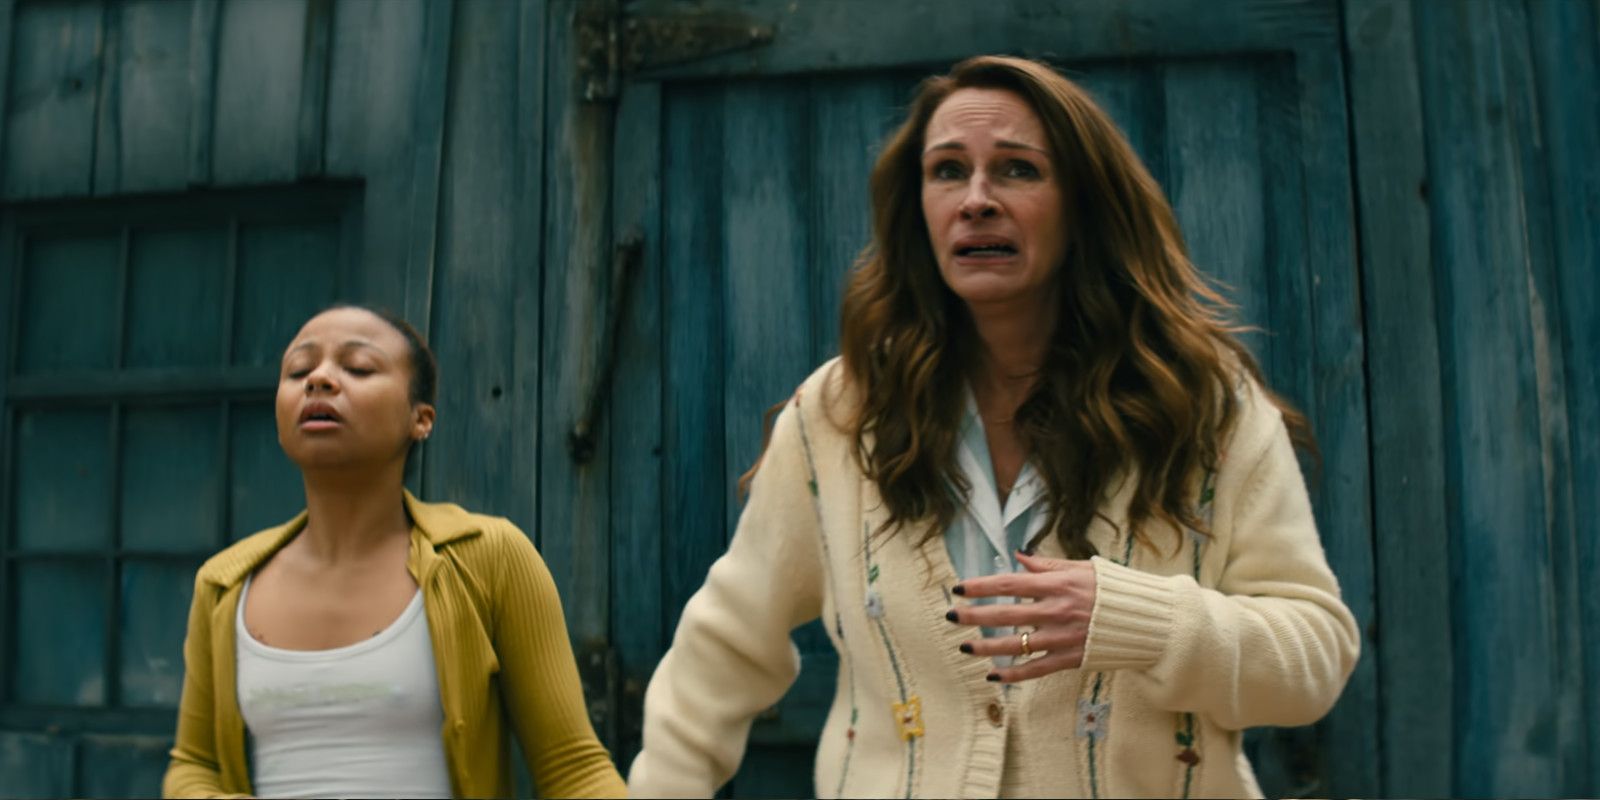 Ruth Scott (Myha'la) and Amanda Sandford (Julia Roberts) looking terrified and staring at something offscreen in Leave the World Behind